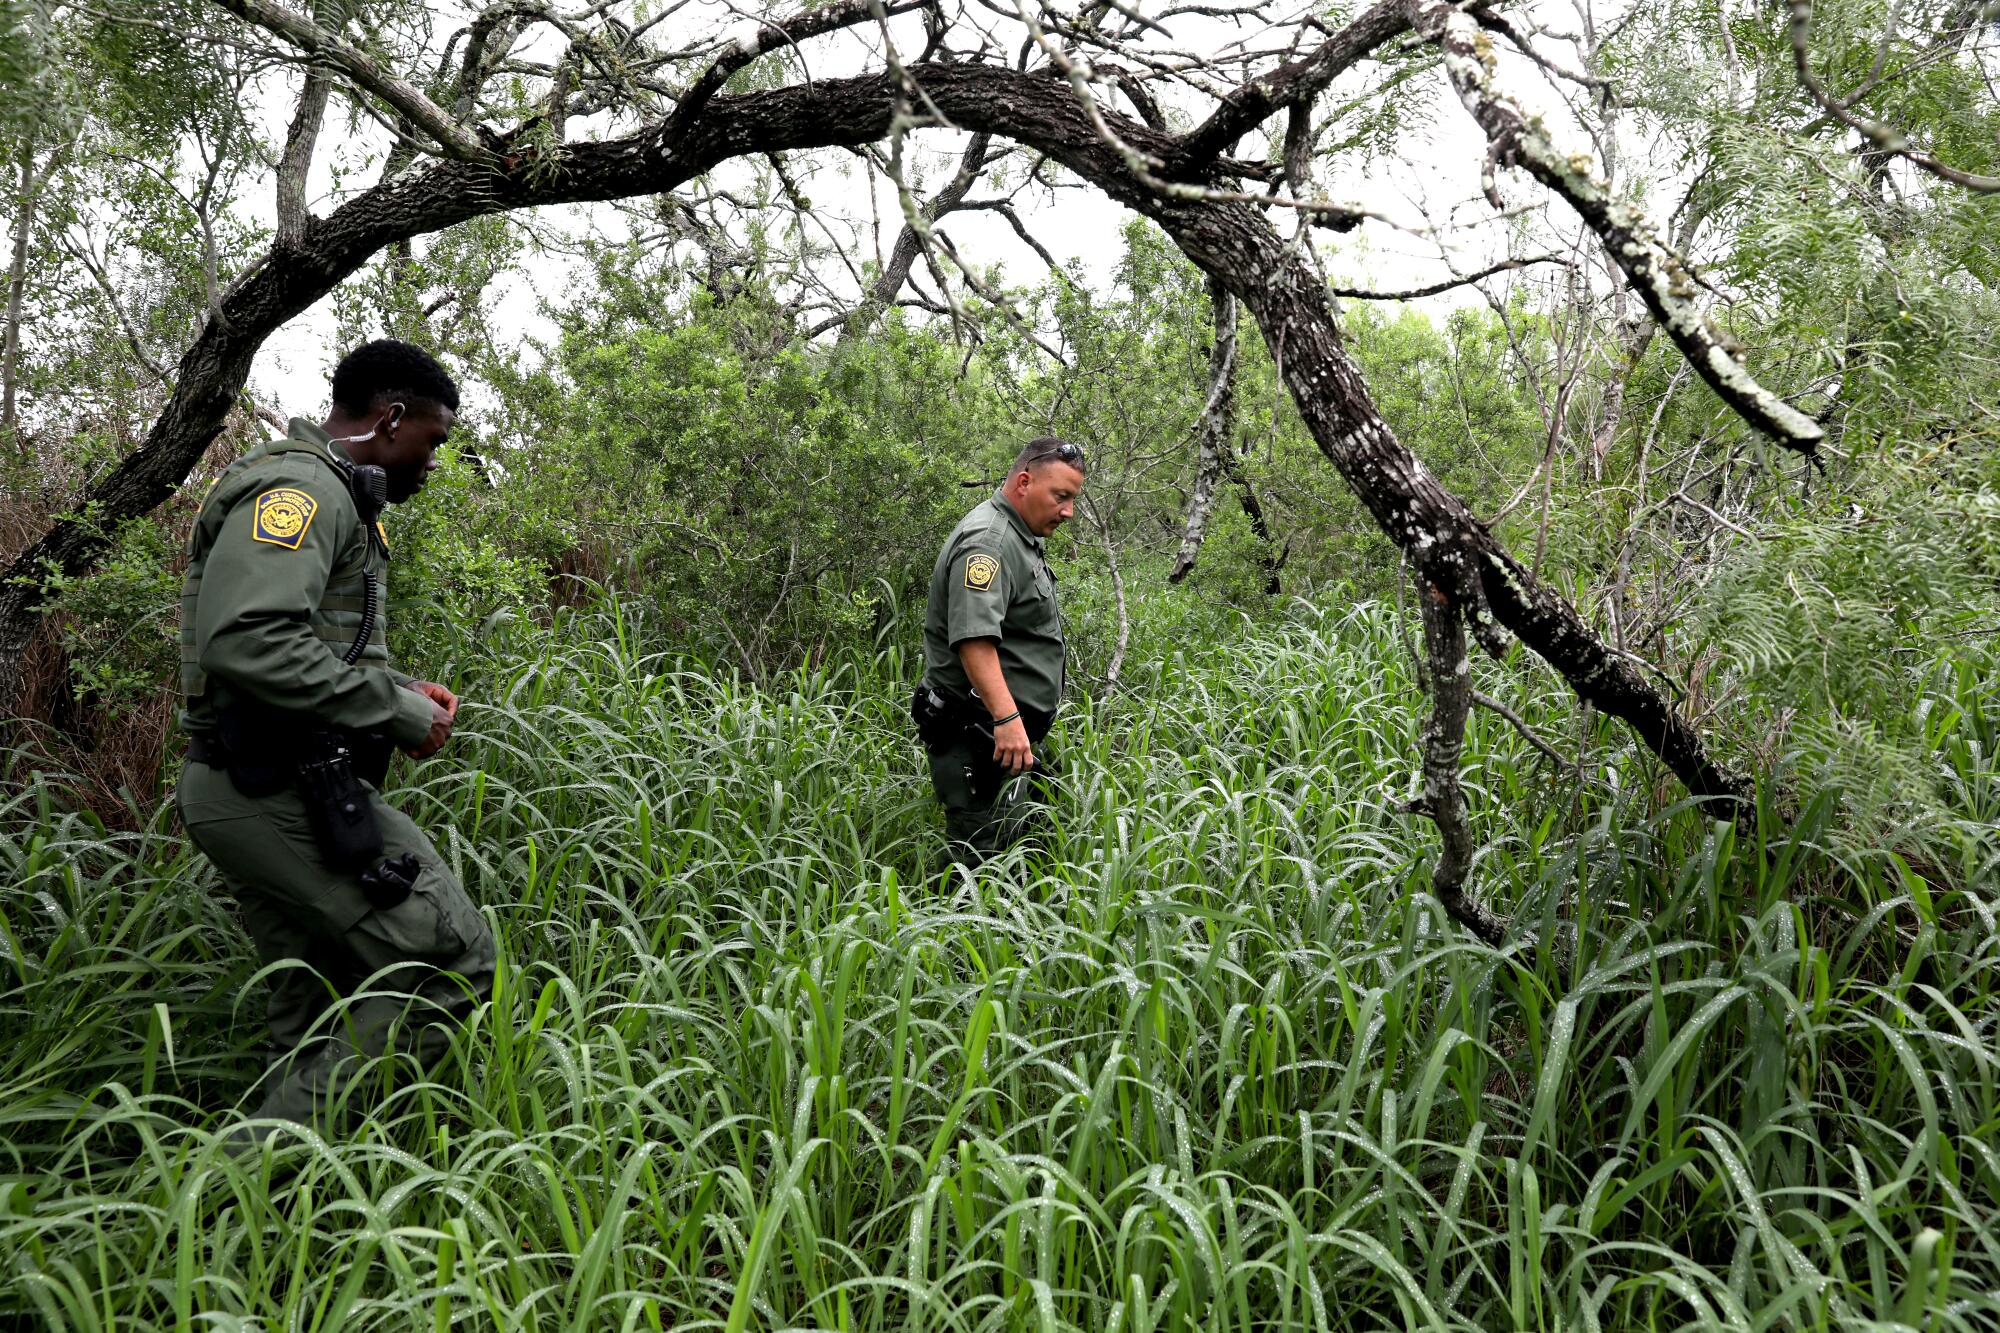 Two border agents walk in tall grass.